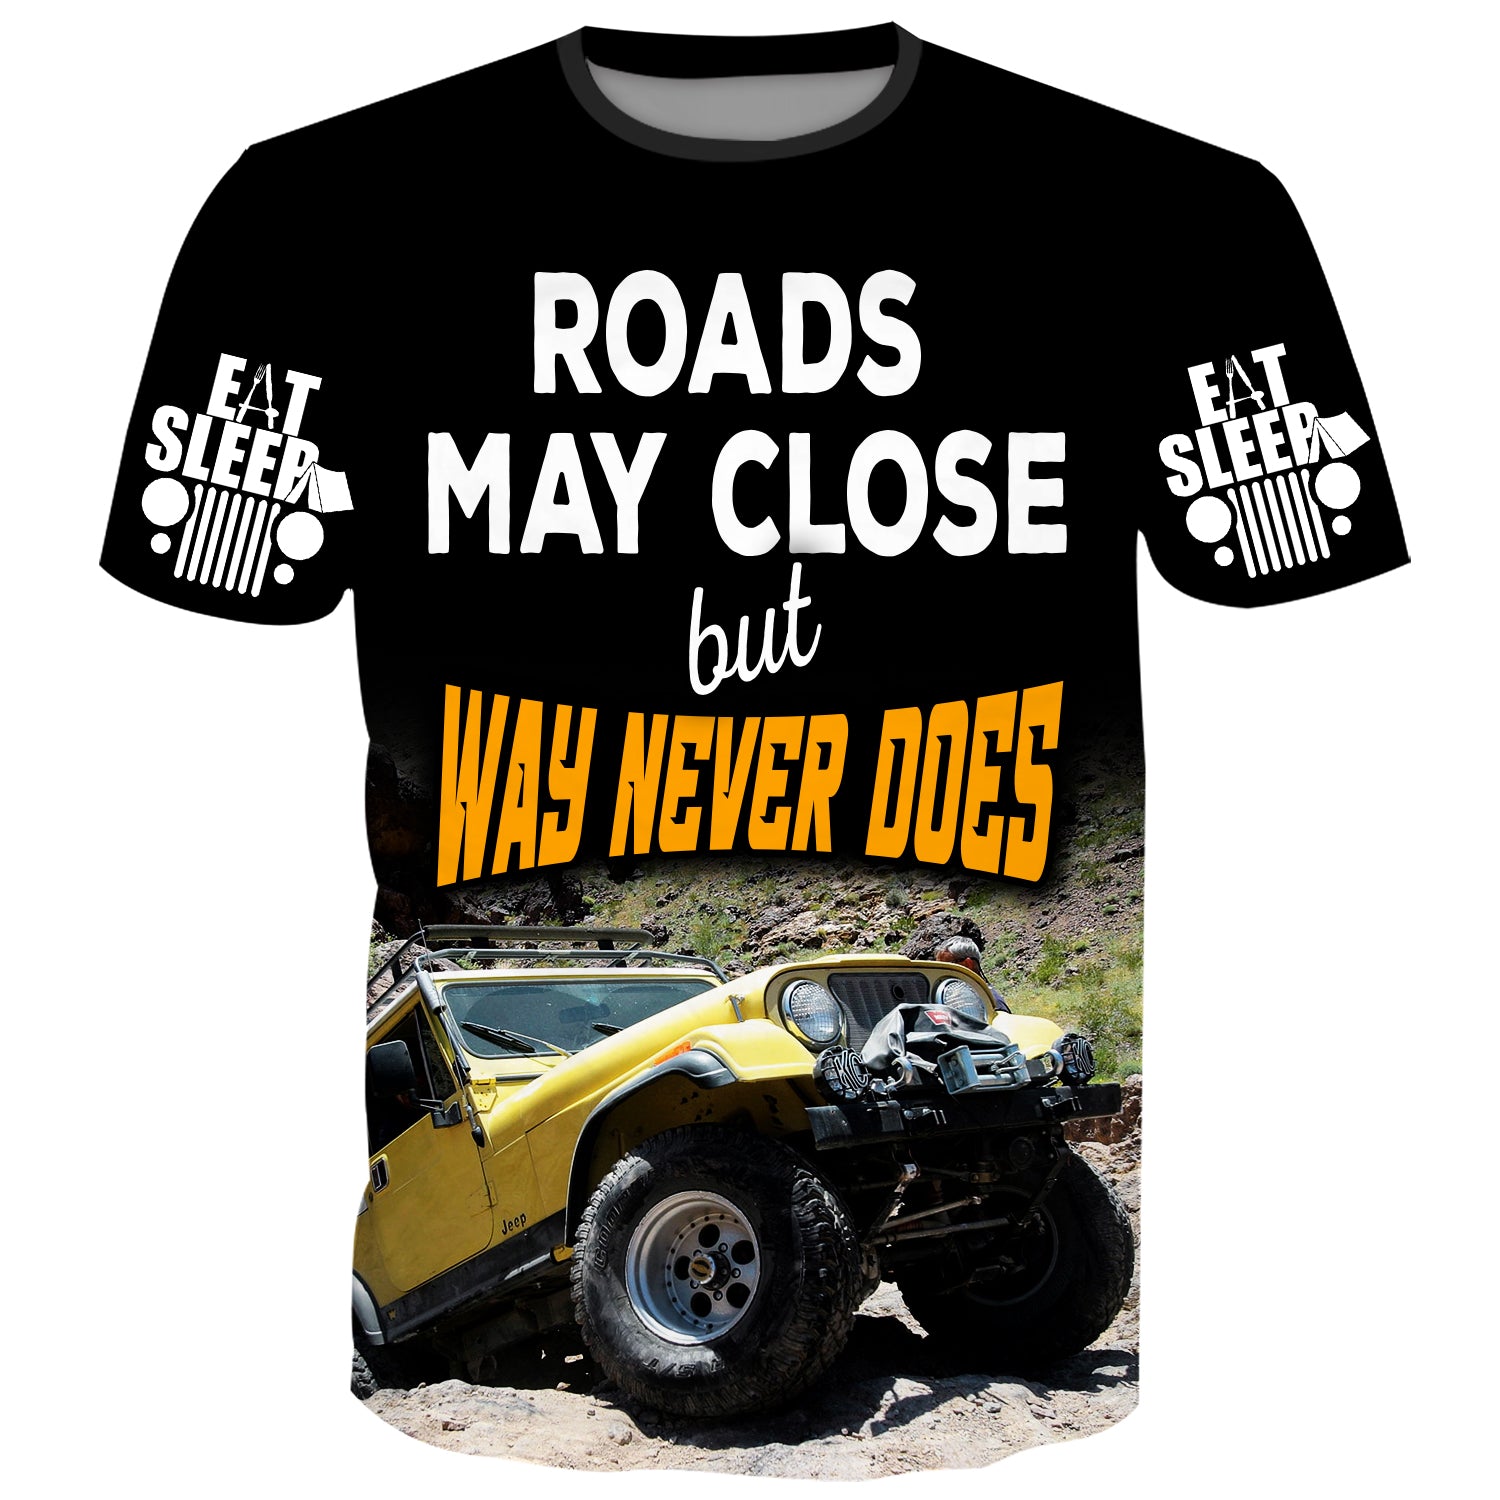 Roads may close but way never does - Jeep T-Shirt